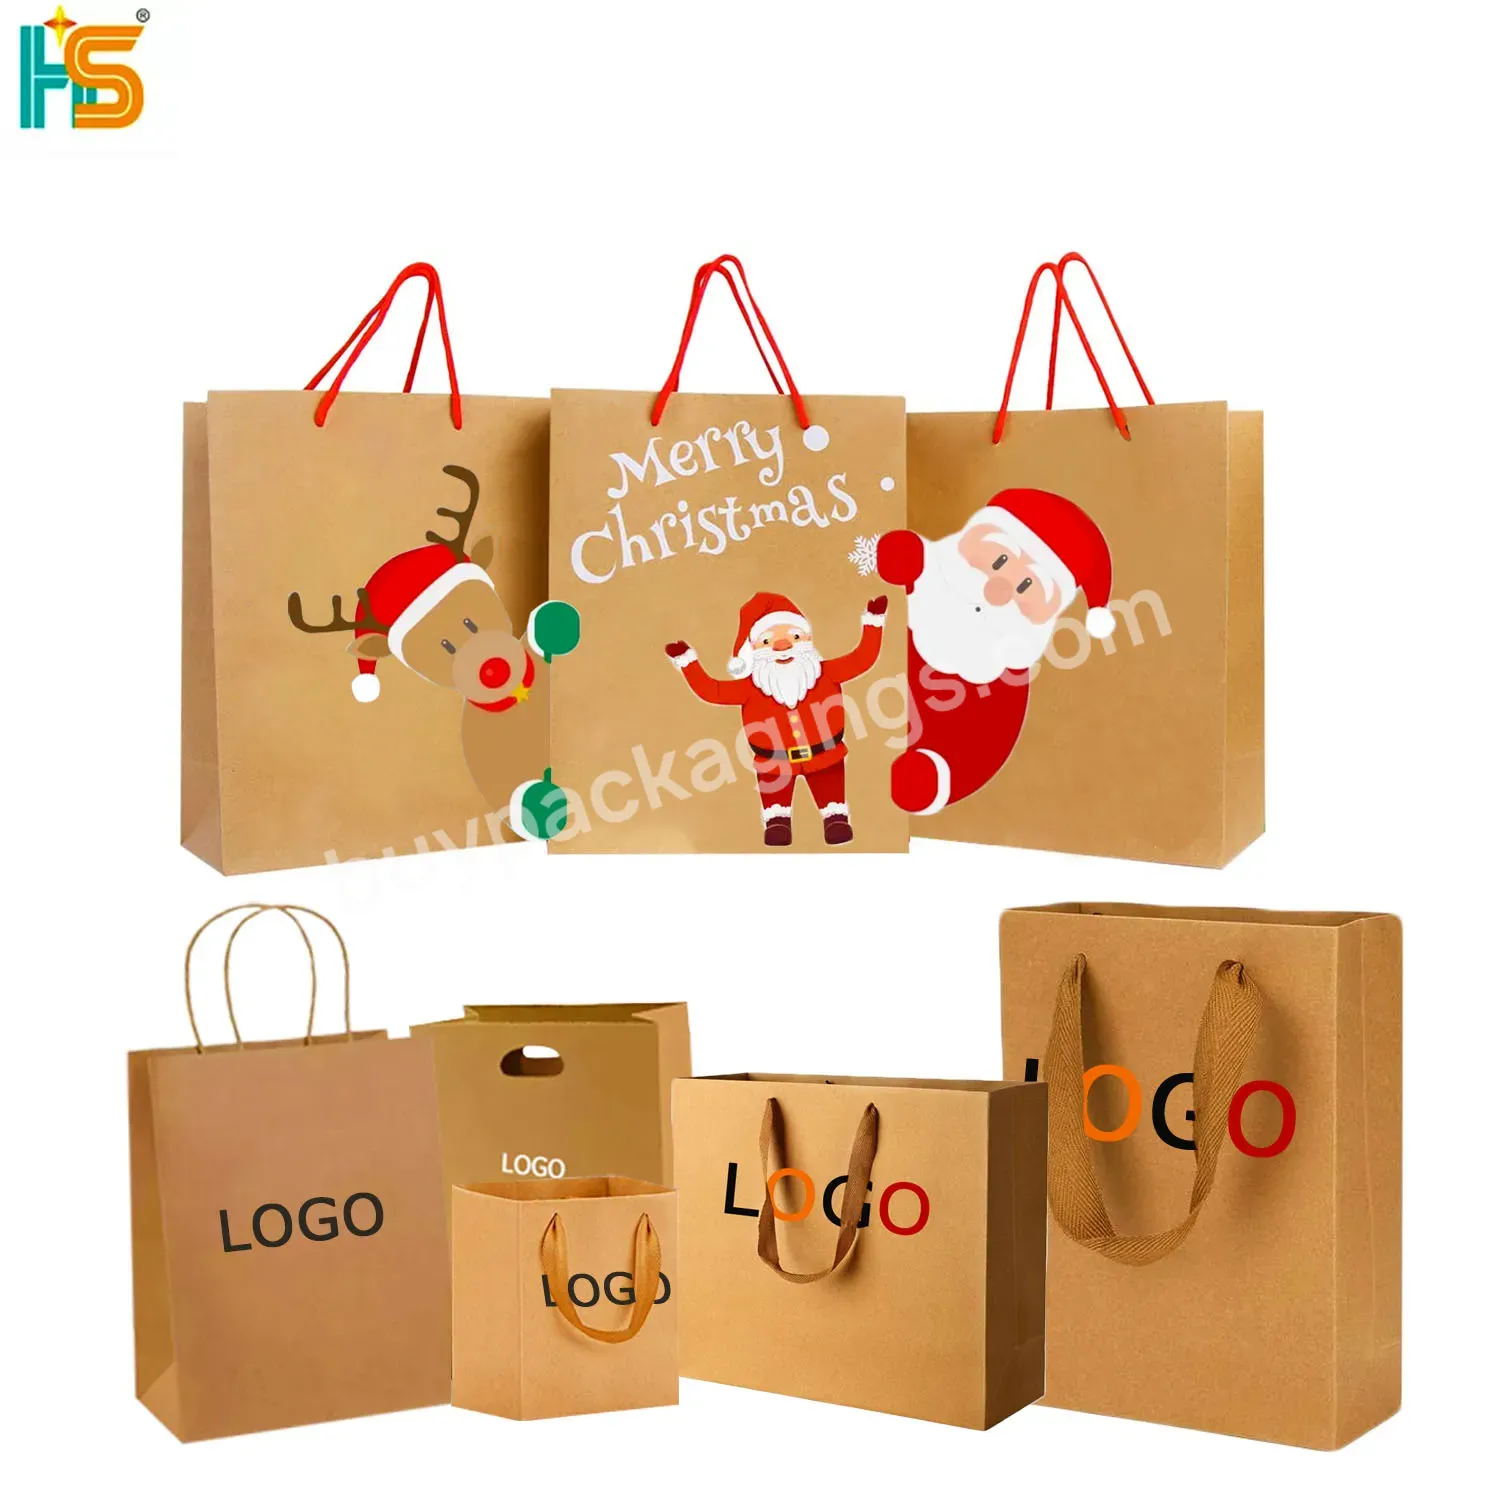 Factory Price Recyclable Kraft Brown Paper Bag With Rope Handle Your Logo Flat Handle Kraft Paper Bag - Buy Kraft Brown Paper Bags,Recyclable Kraft Paper Bag,Flat Handle Kraft Paper Bag.